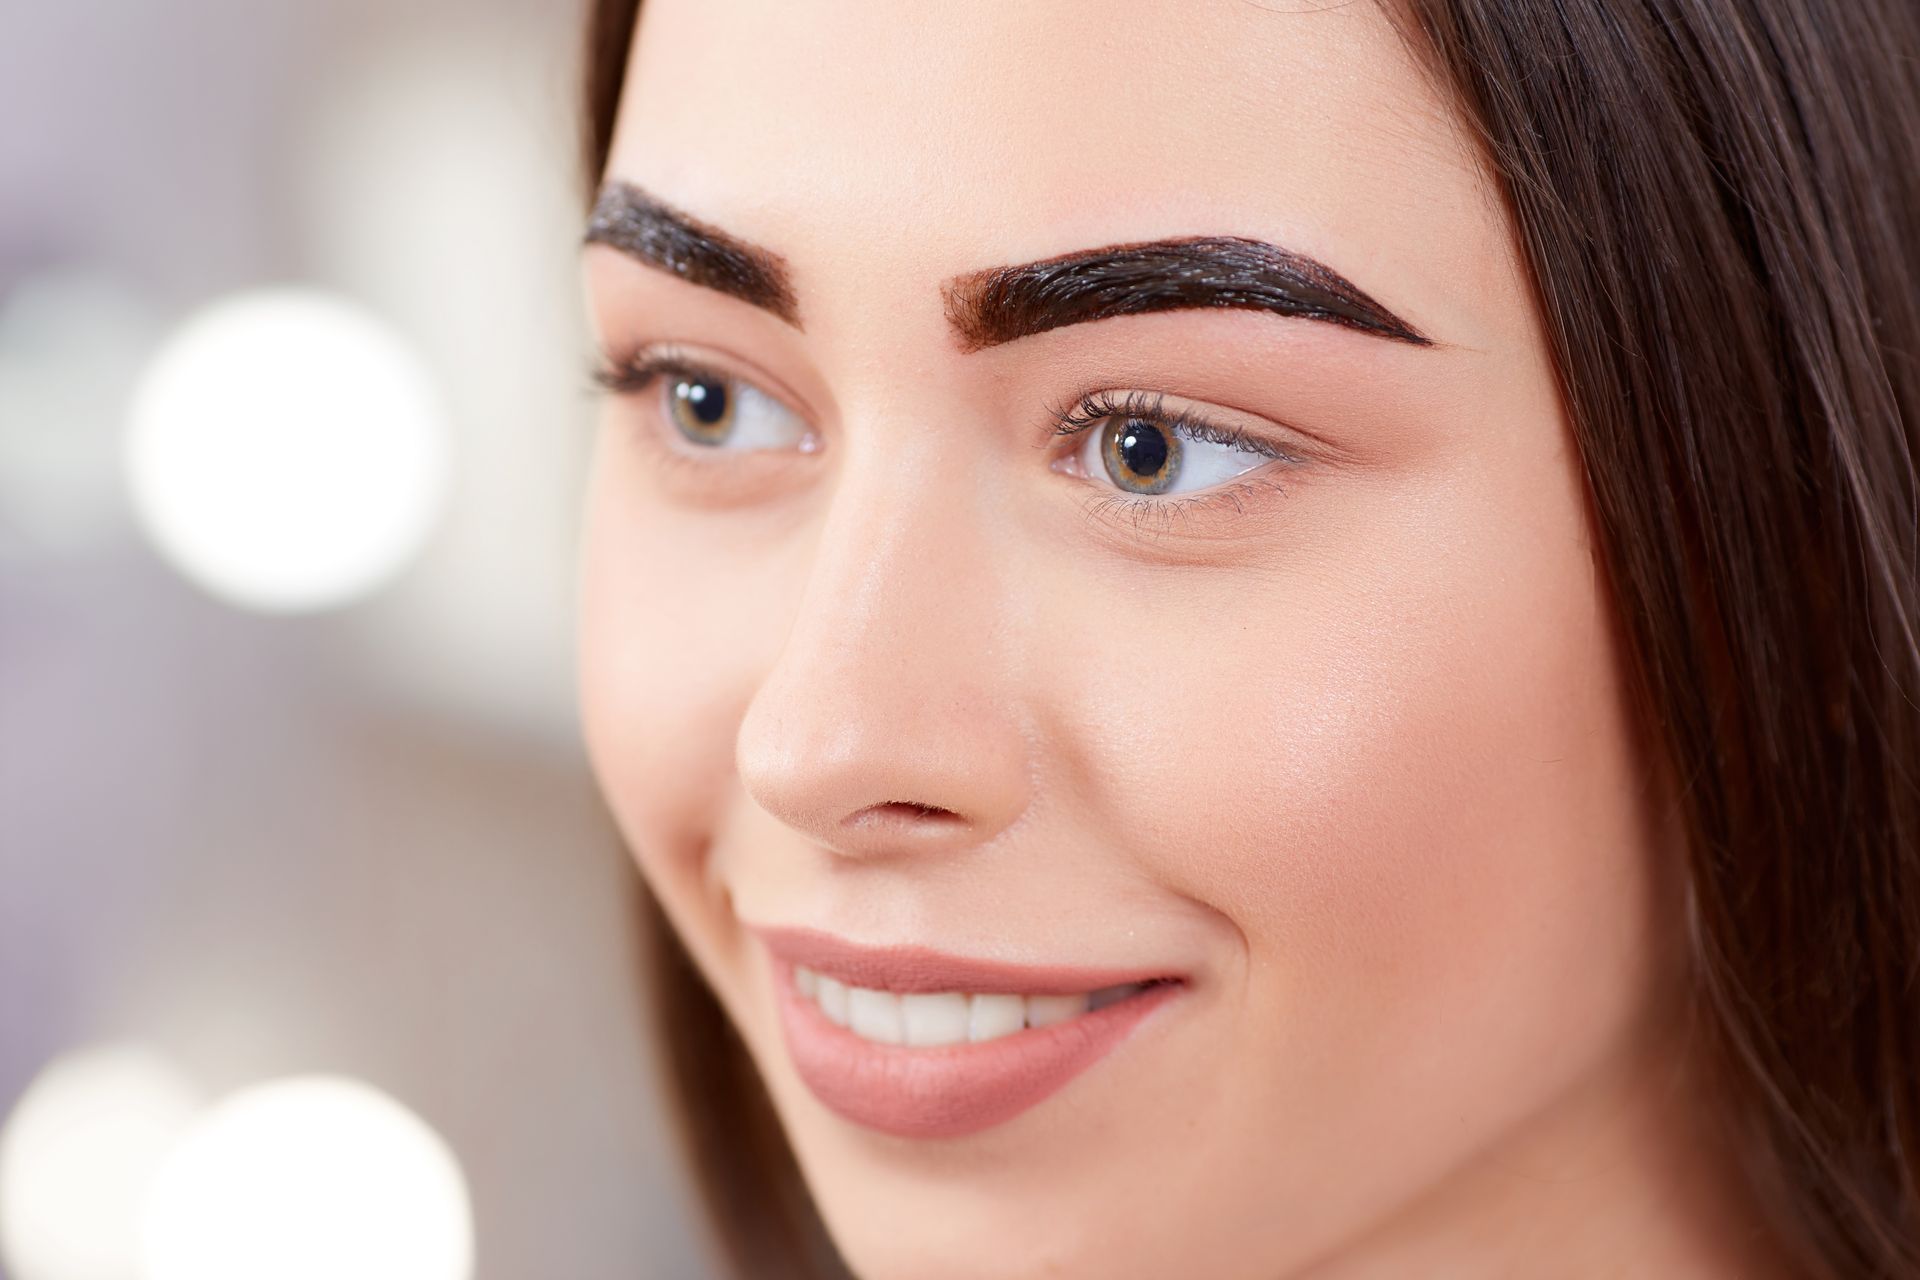 a close up of a woman 's face with  her eyebrows tinted.